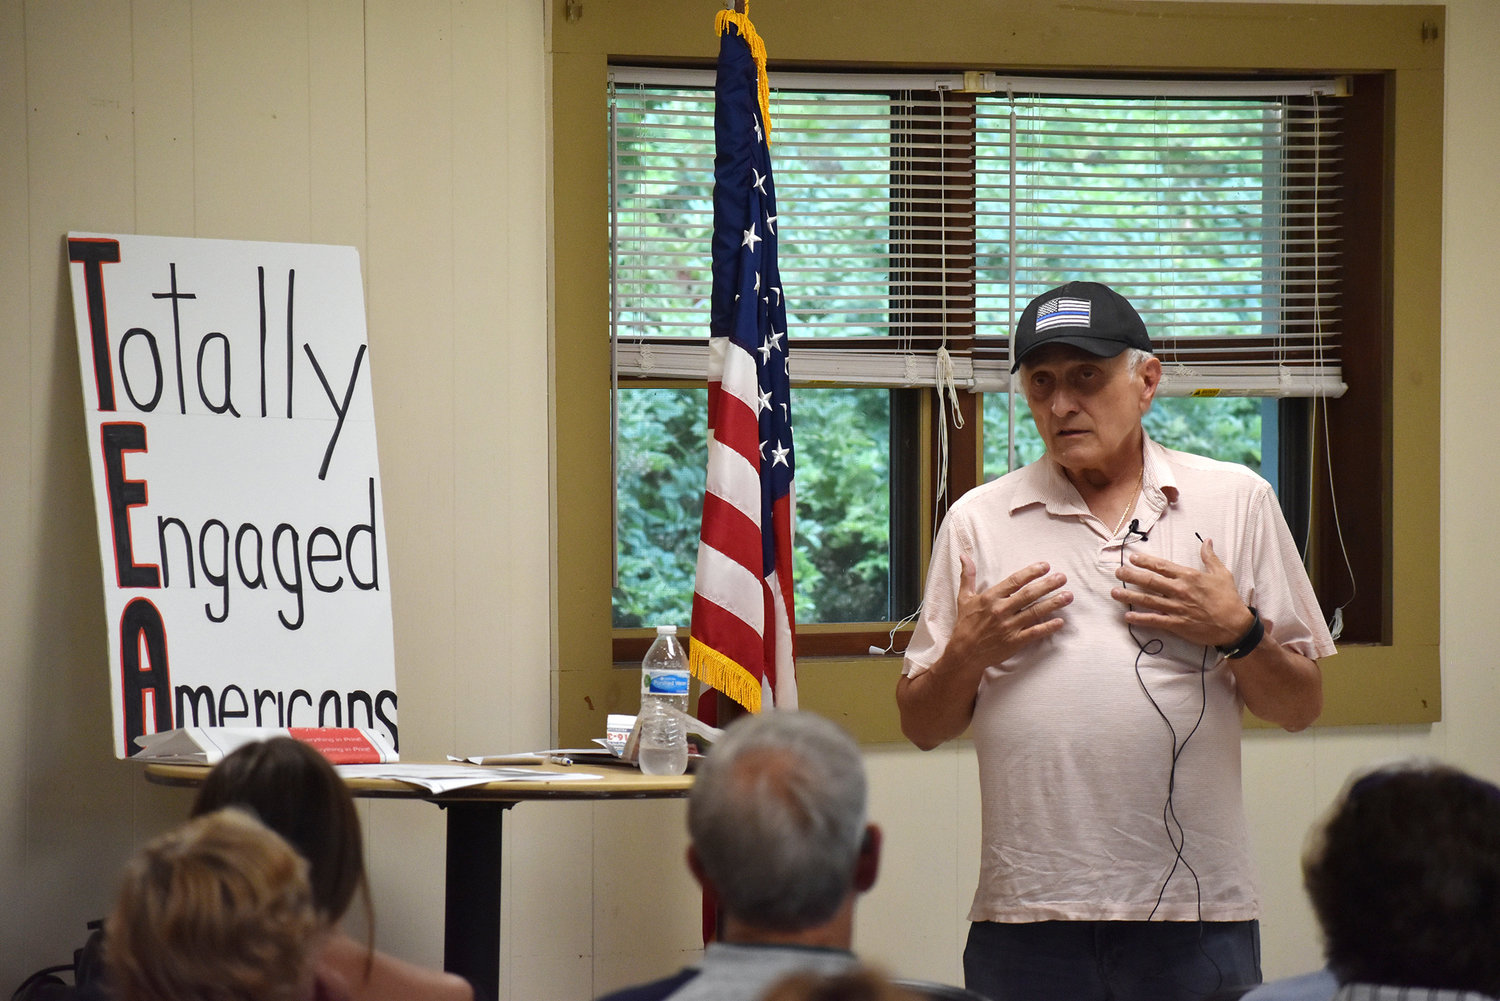 Carl Paladino is pictured at a recent meeting of the Jamestown-area Tea Party group. He spoke ahead of the Aug. 23 Republican primary for New York’s new 23rd Congressional District.